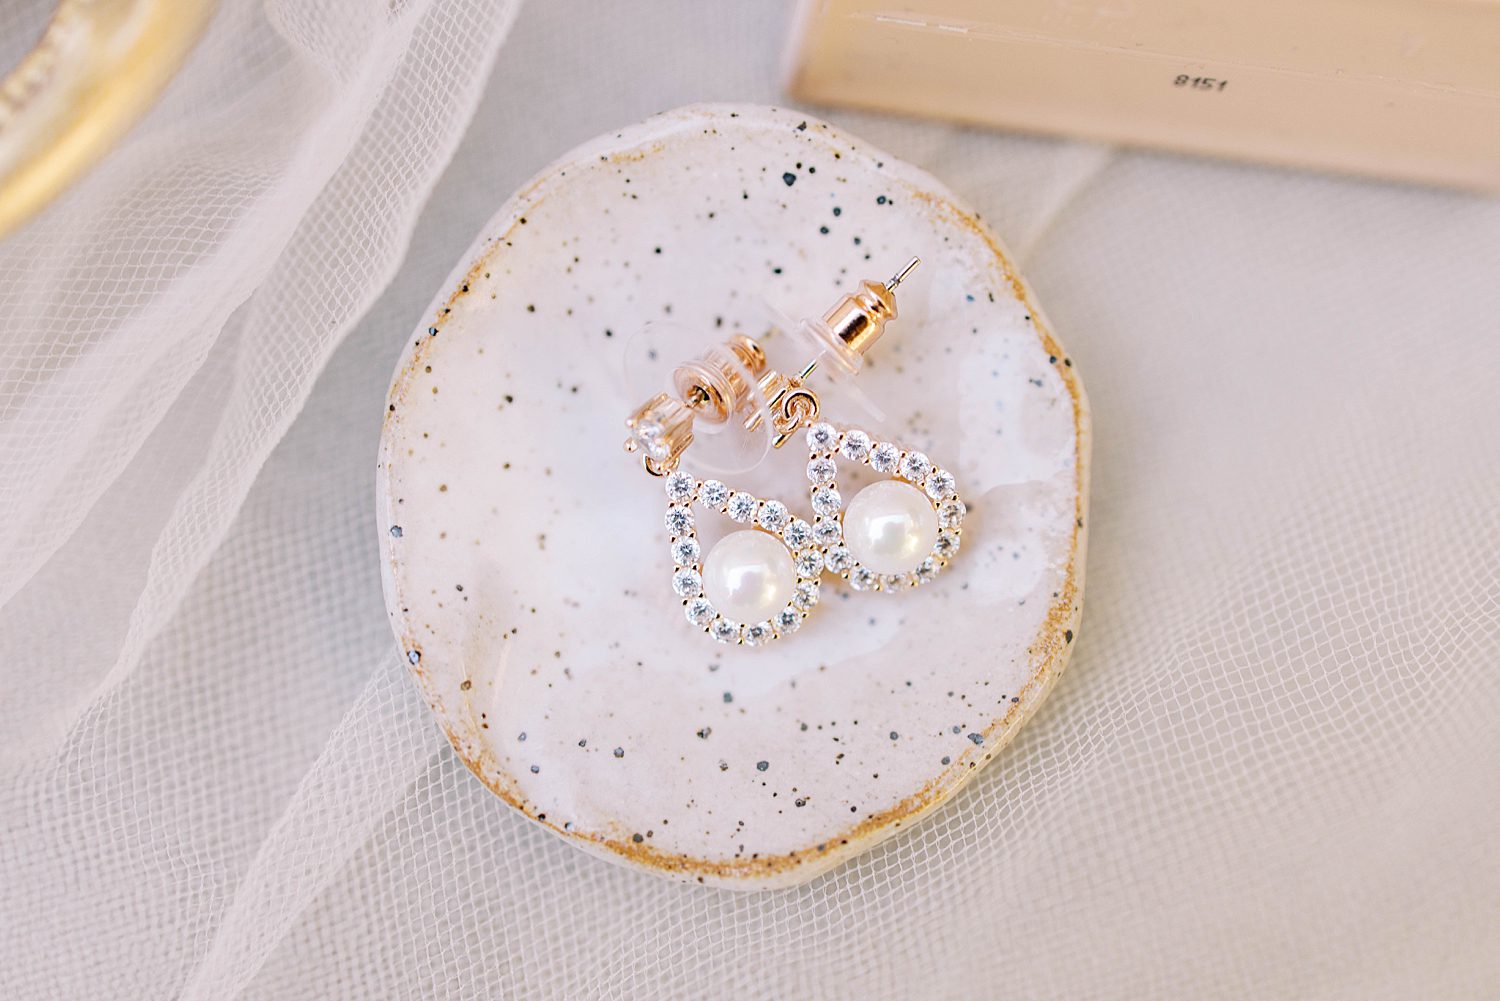 pearl earrings rest on white and gold flecked tray